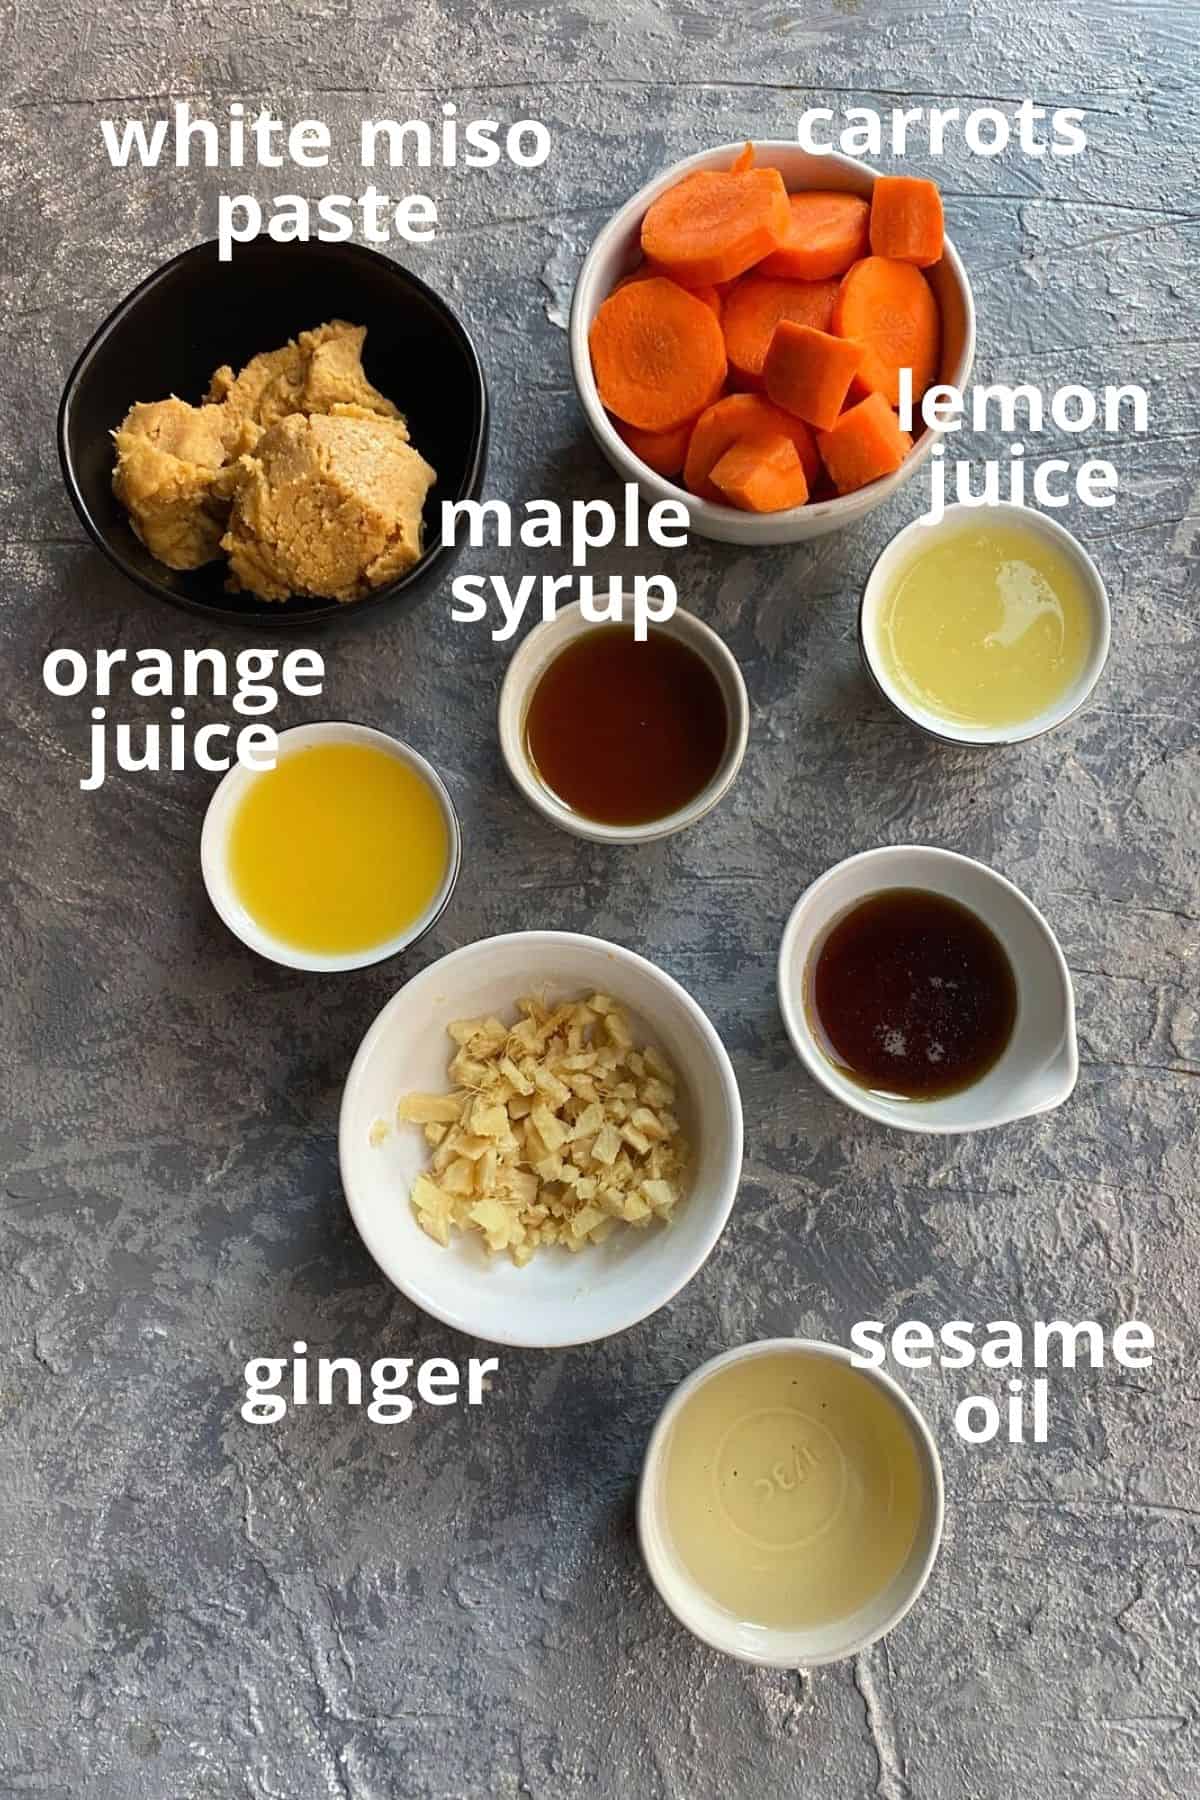 overhead view of the ingredients needed for carrot ginger dressing: carrots, ginger, miso, orange juice, sesame oil and maple syrup